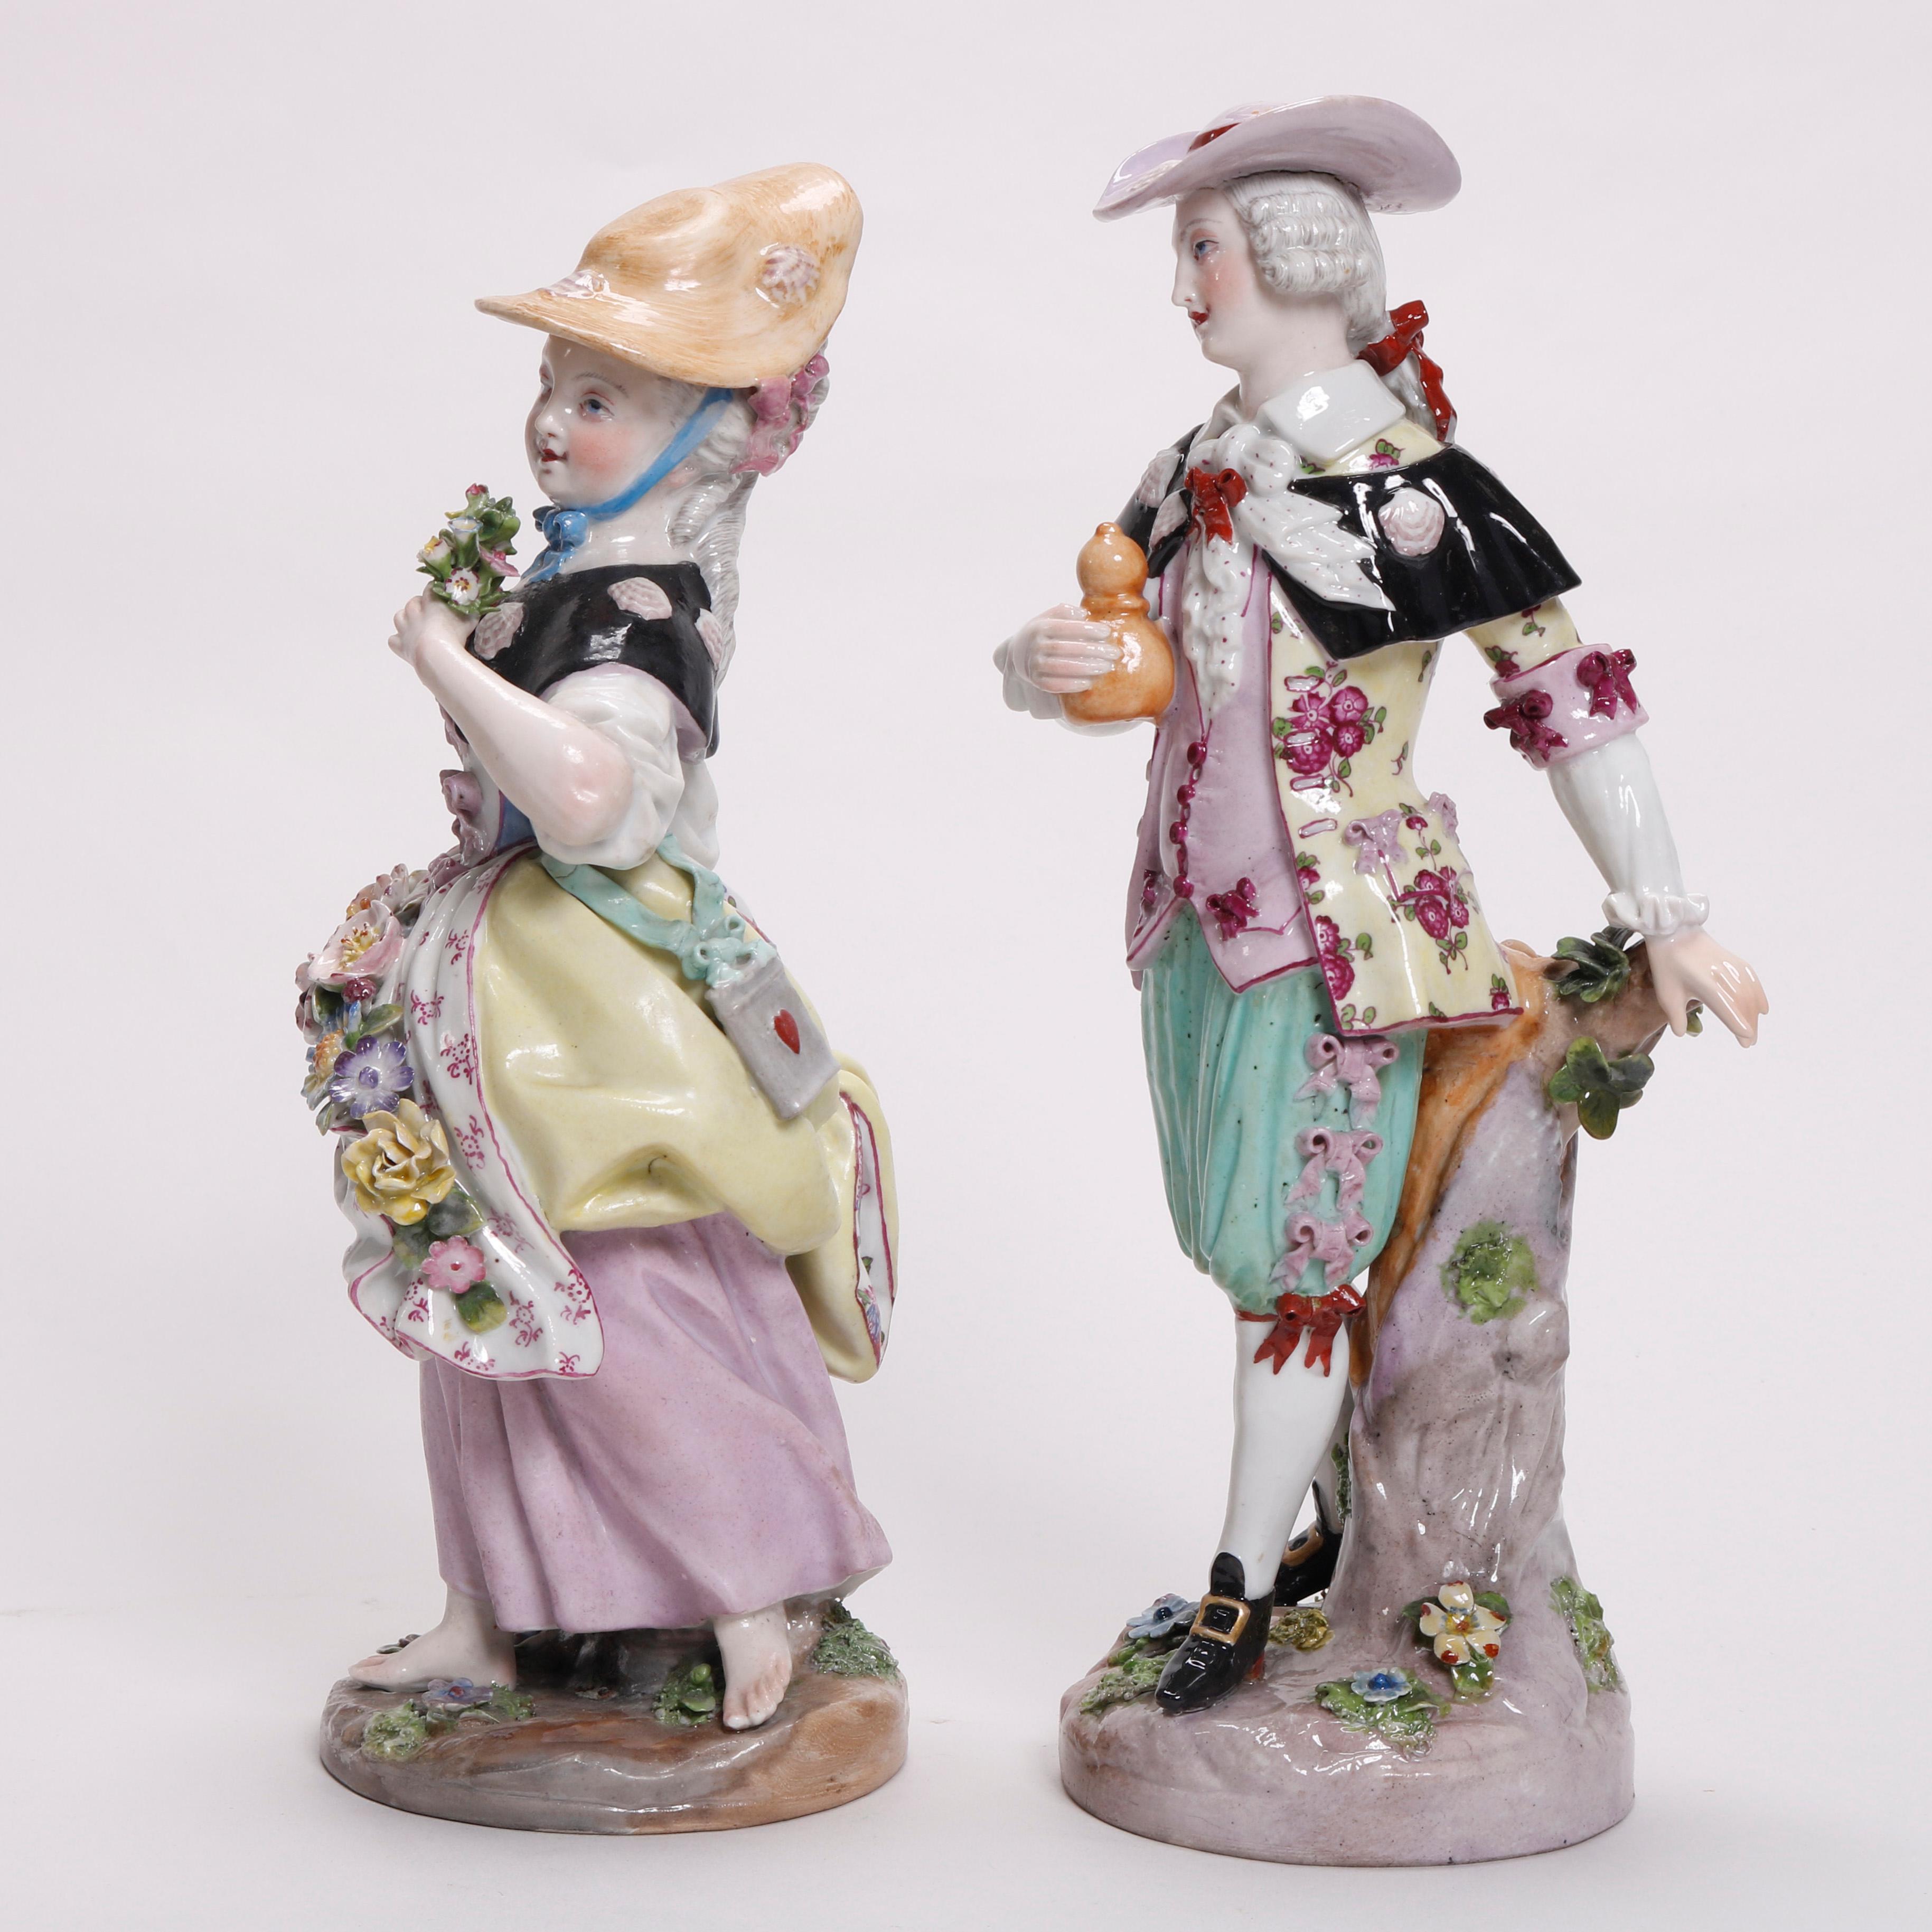 An antique pair of German figures by Meissen offer hand painted porcelain construction and depict courting couple with dog in countryside setting, marked on base as photographed, 19th century.

Measures: 11